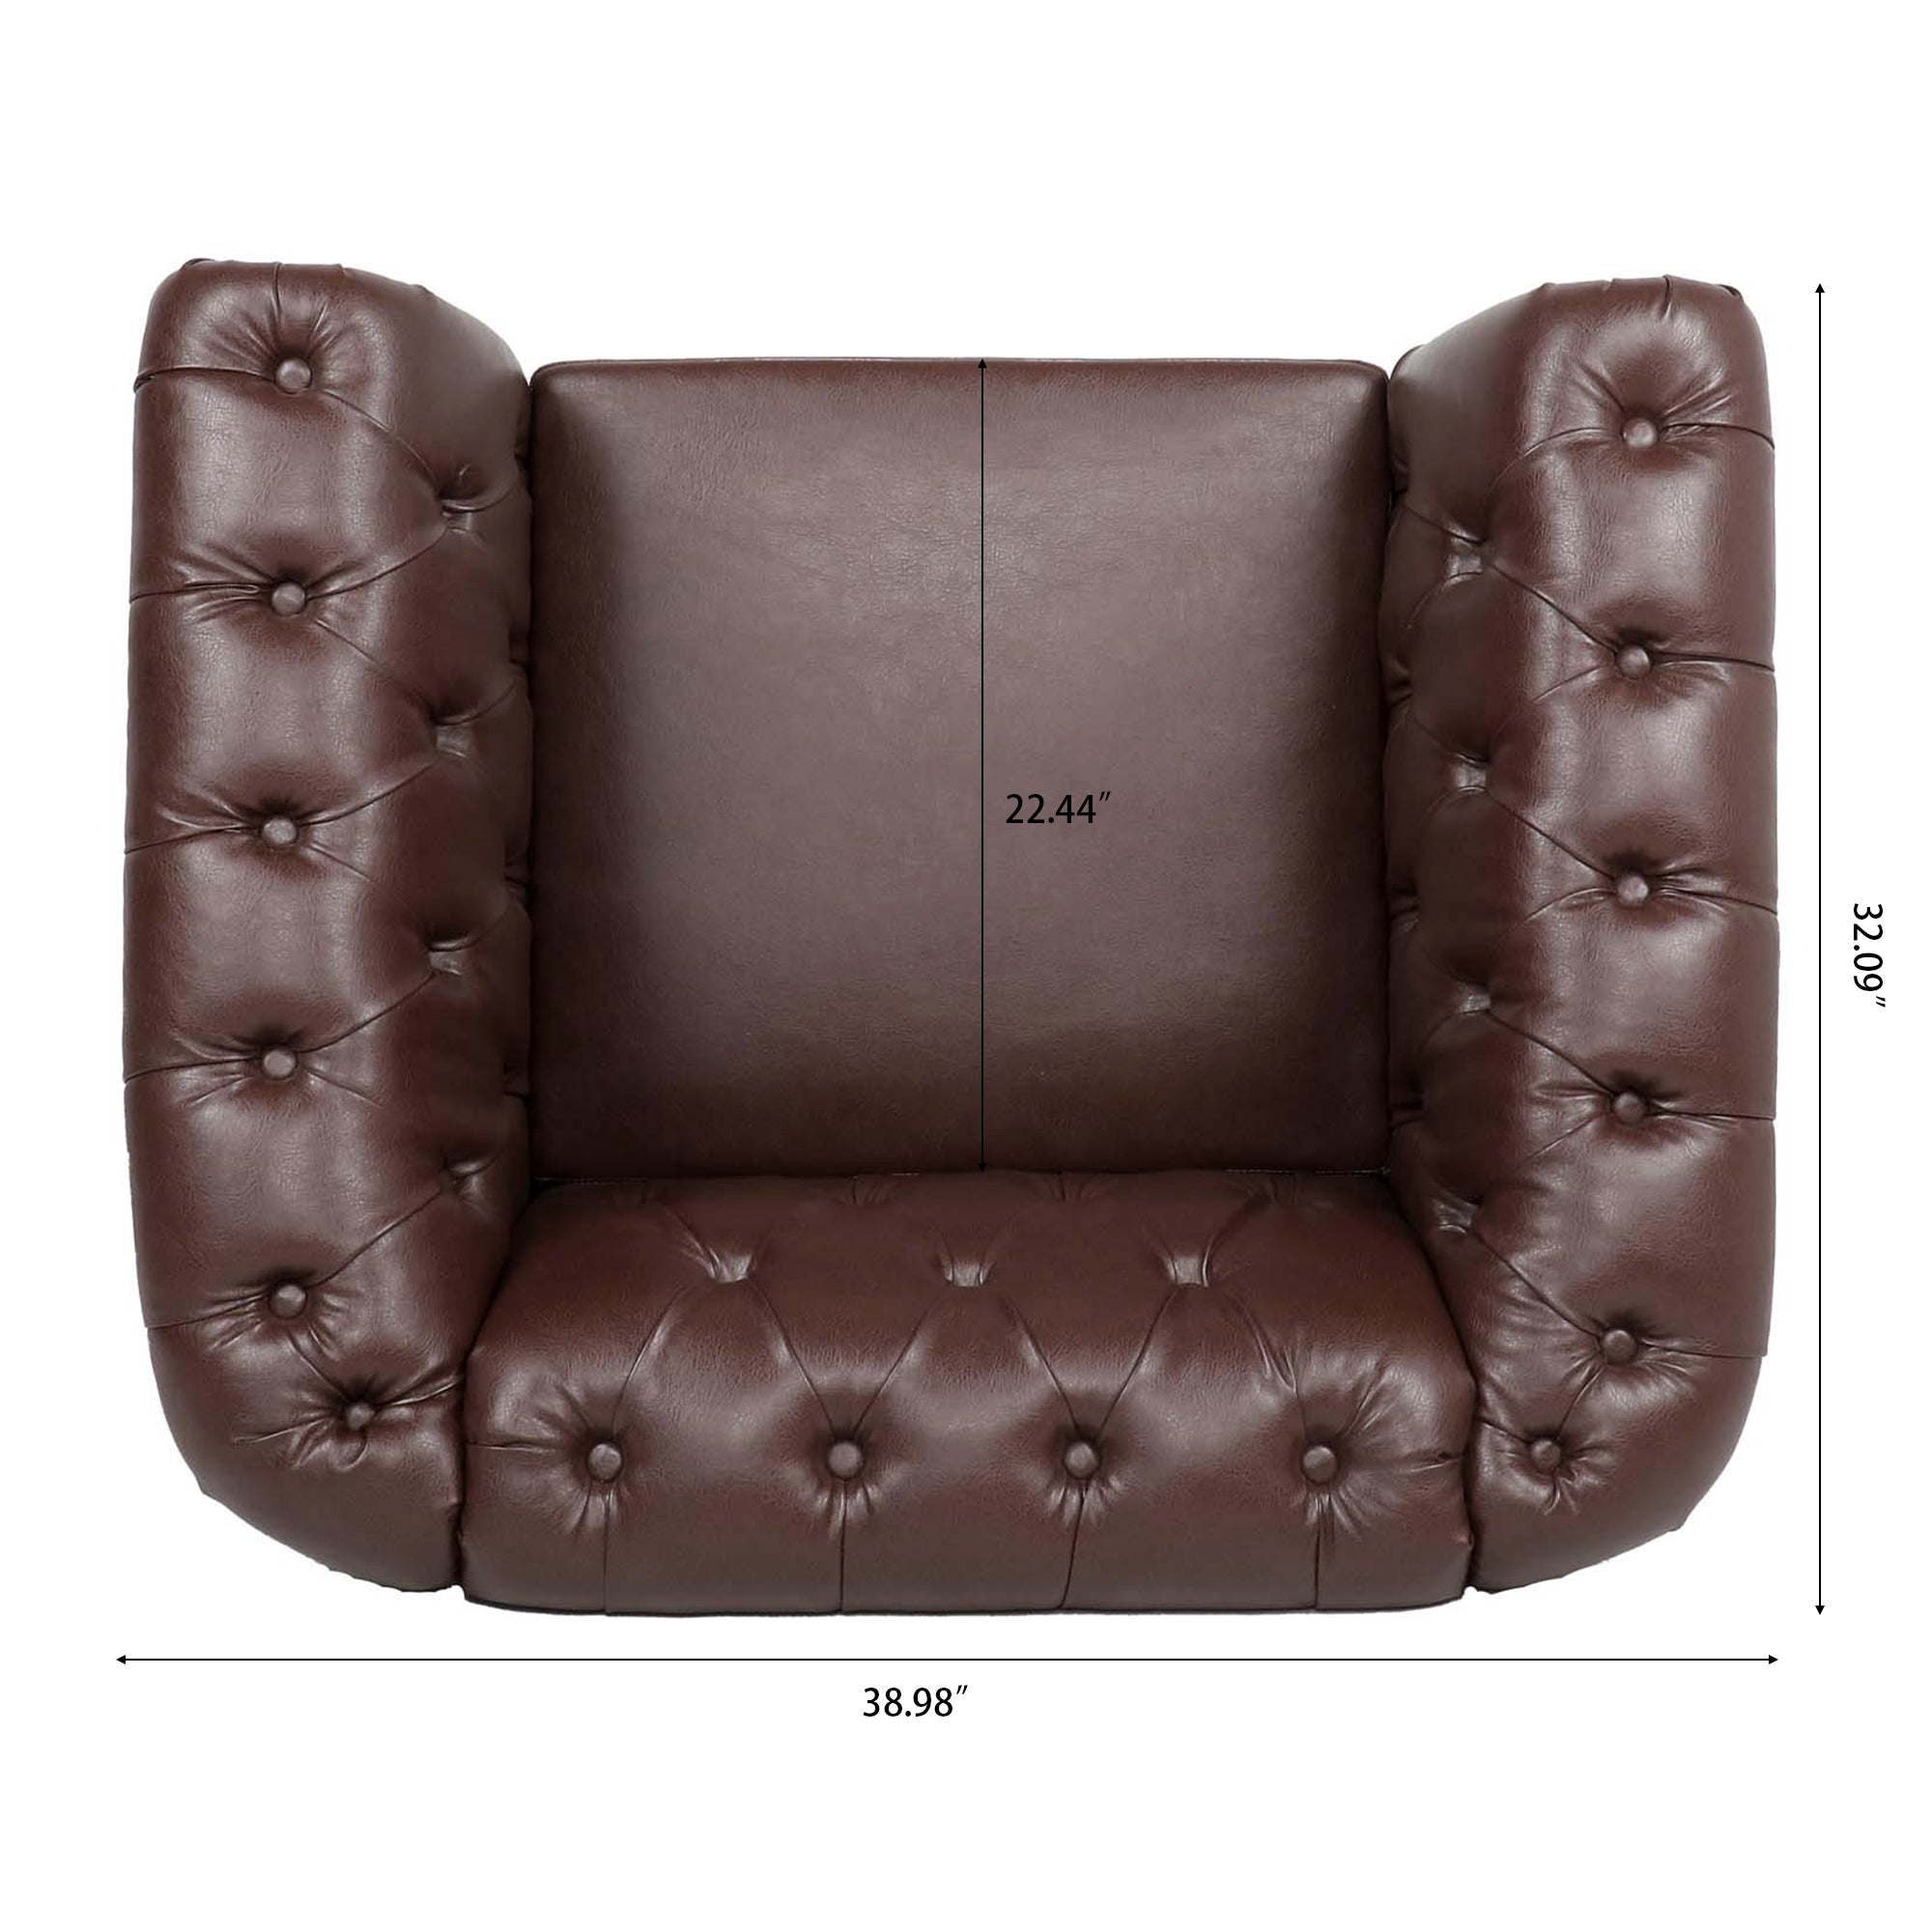 ZNTS 1 Seater Sofa For Living Room W68047176